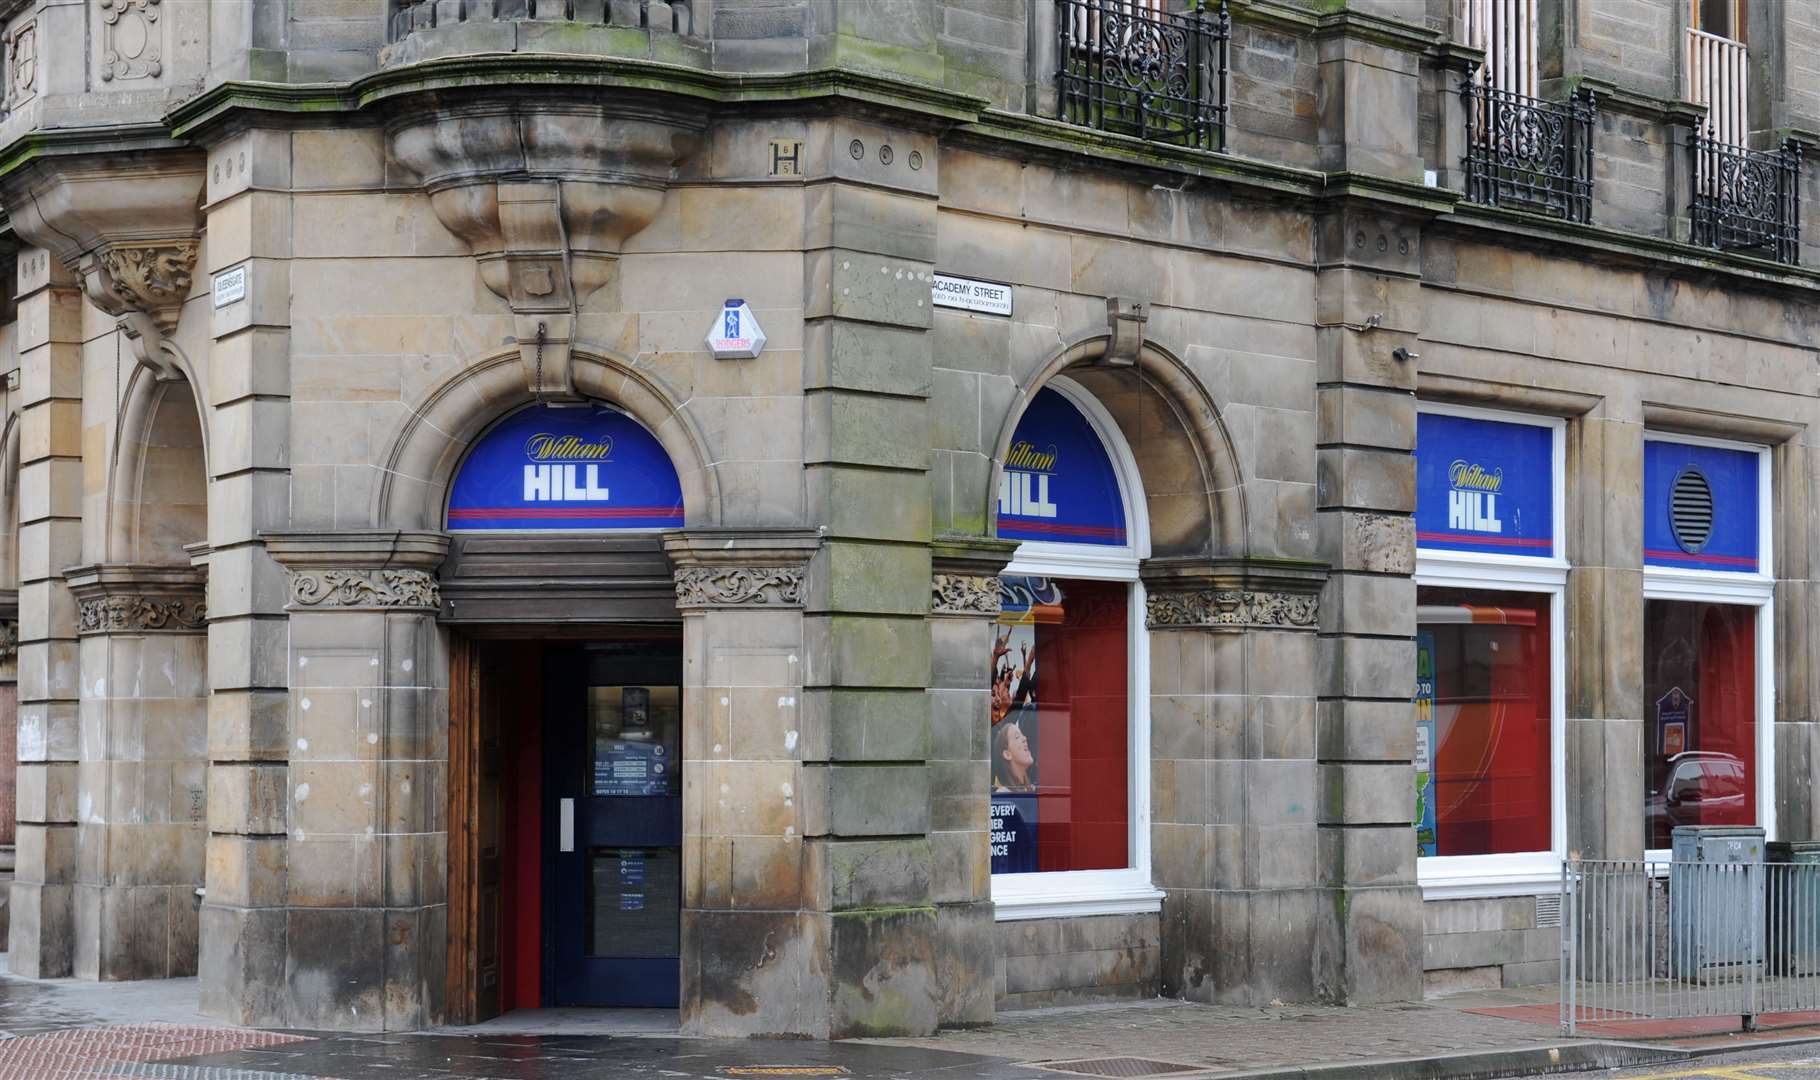 William Hill 2-4 Queensgate..Bookmakers around Inverness...Picture: Daniel Forsyth. Image No.019356.